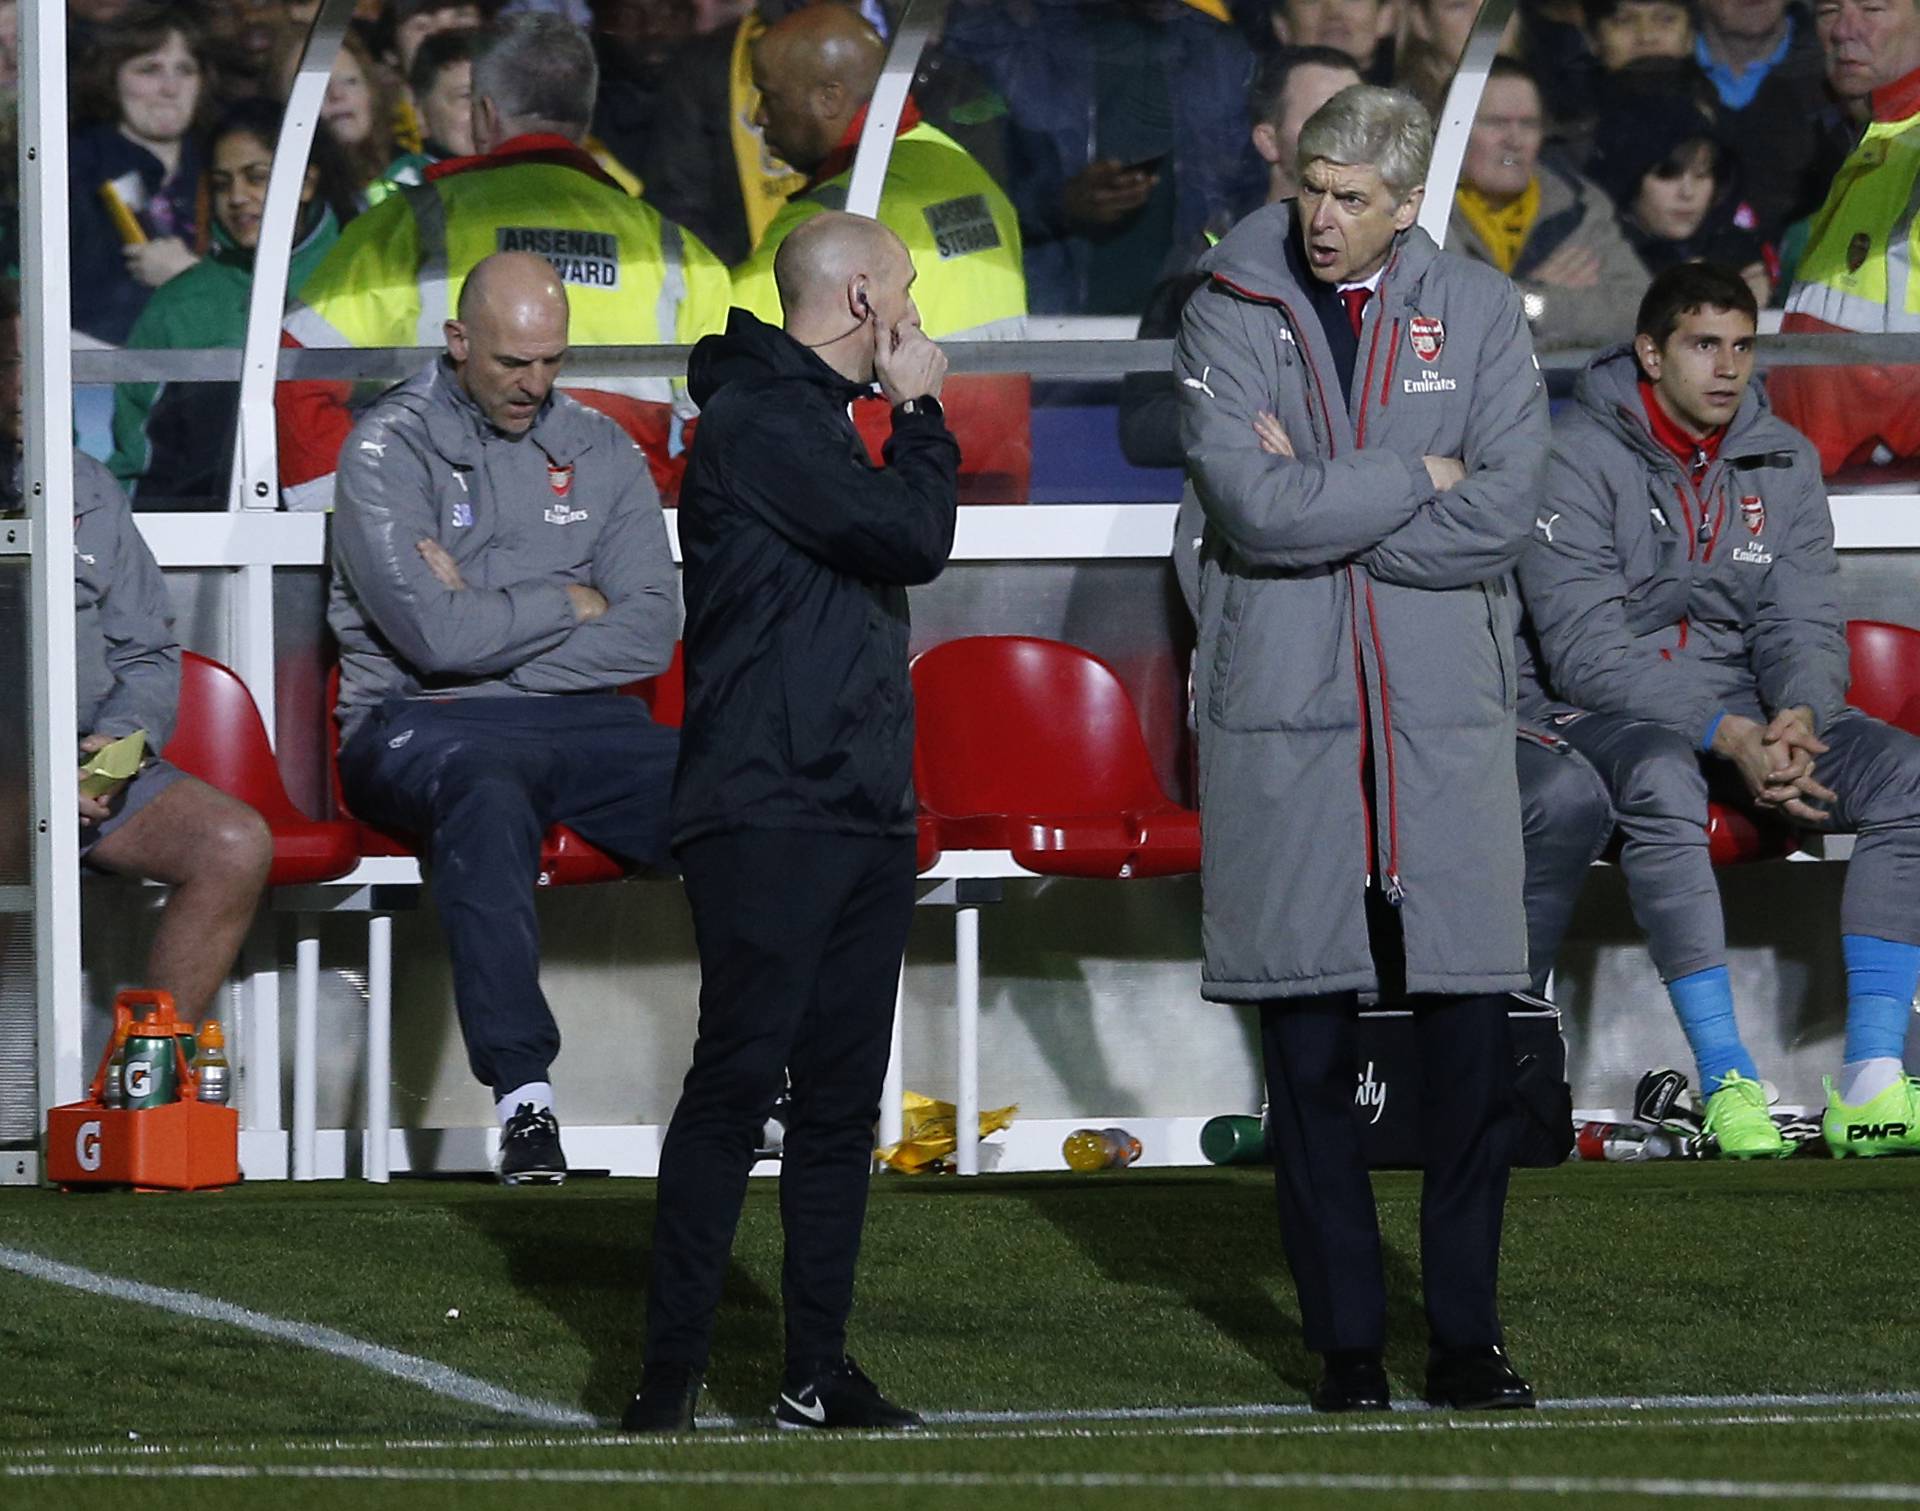 Arsenal manager Arsene Wenger remonstrates with the fourth official